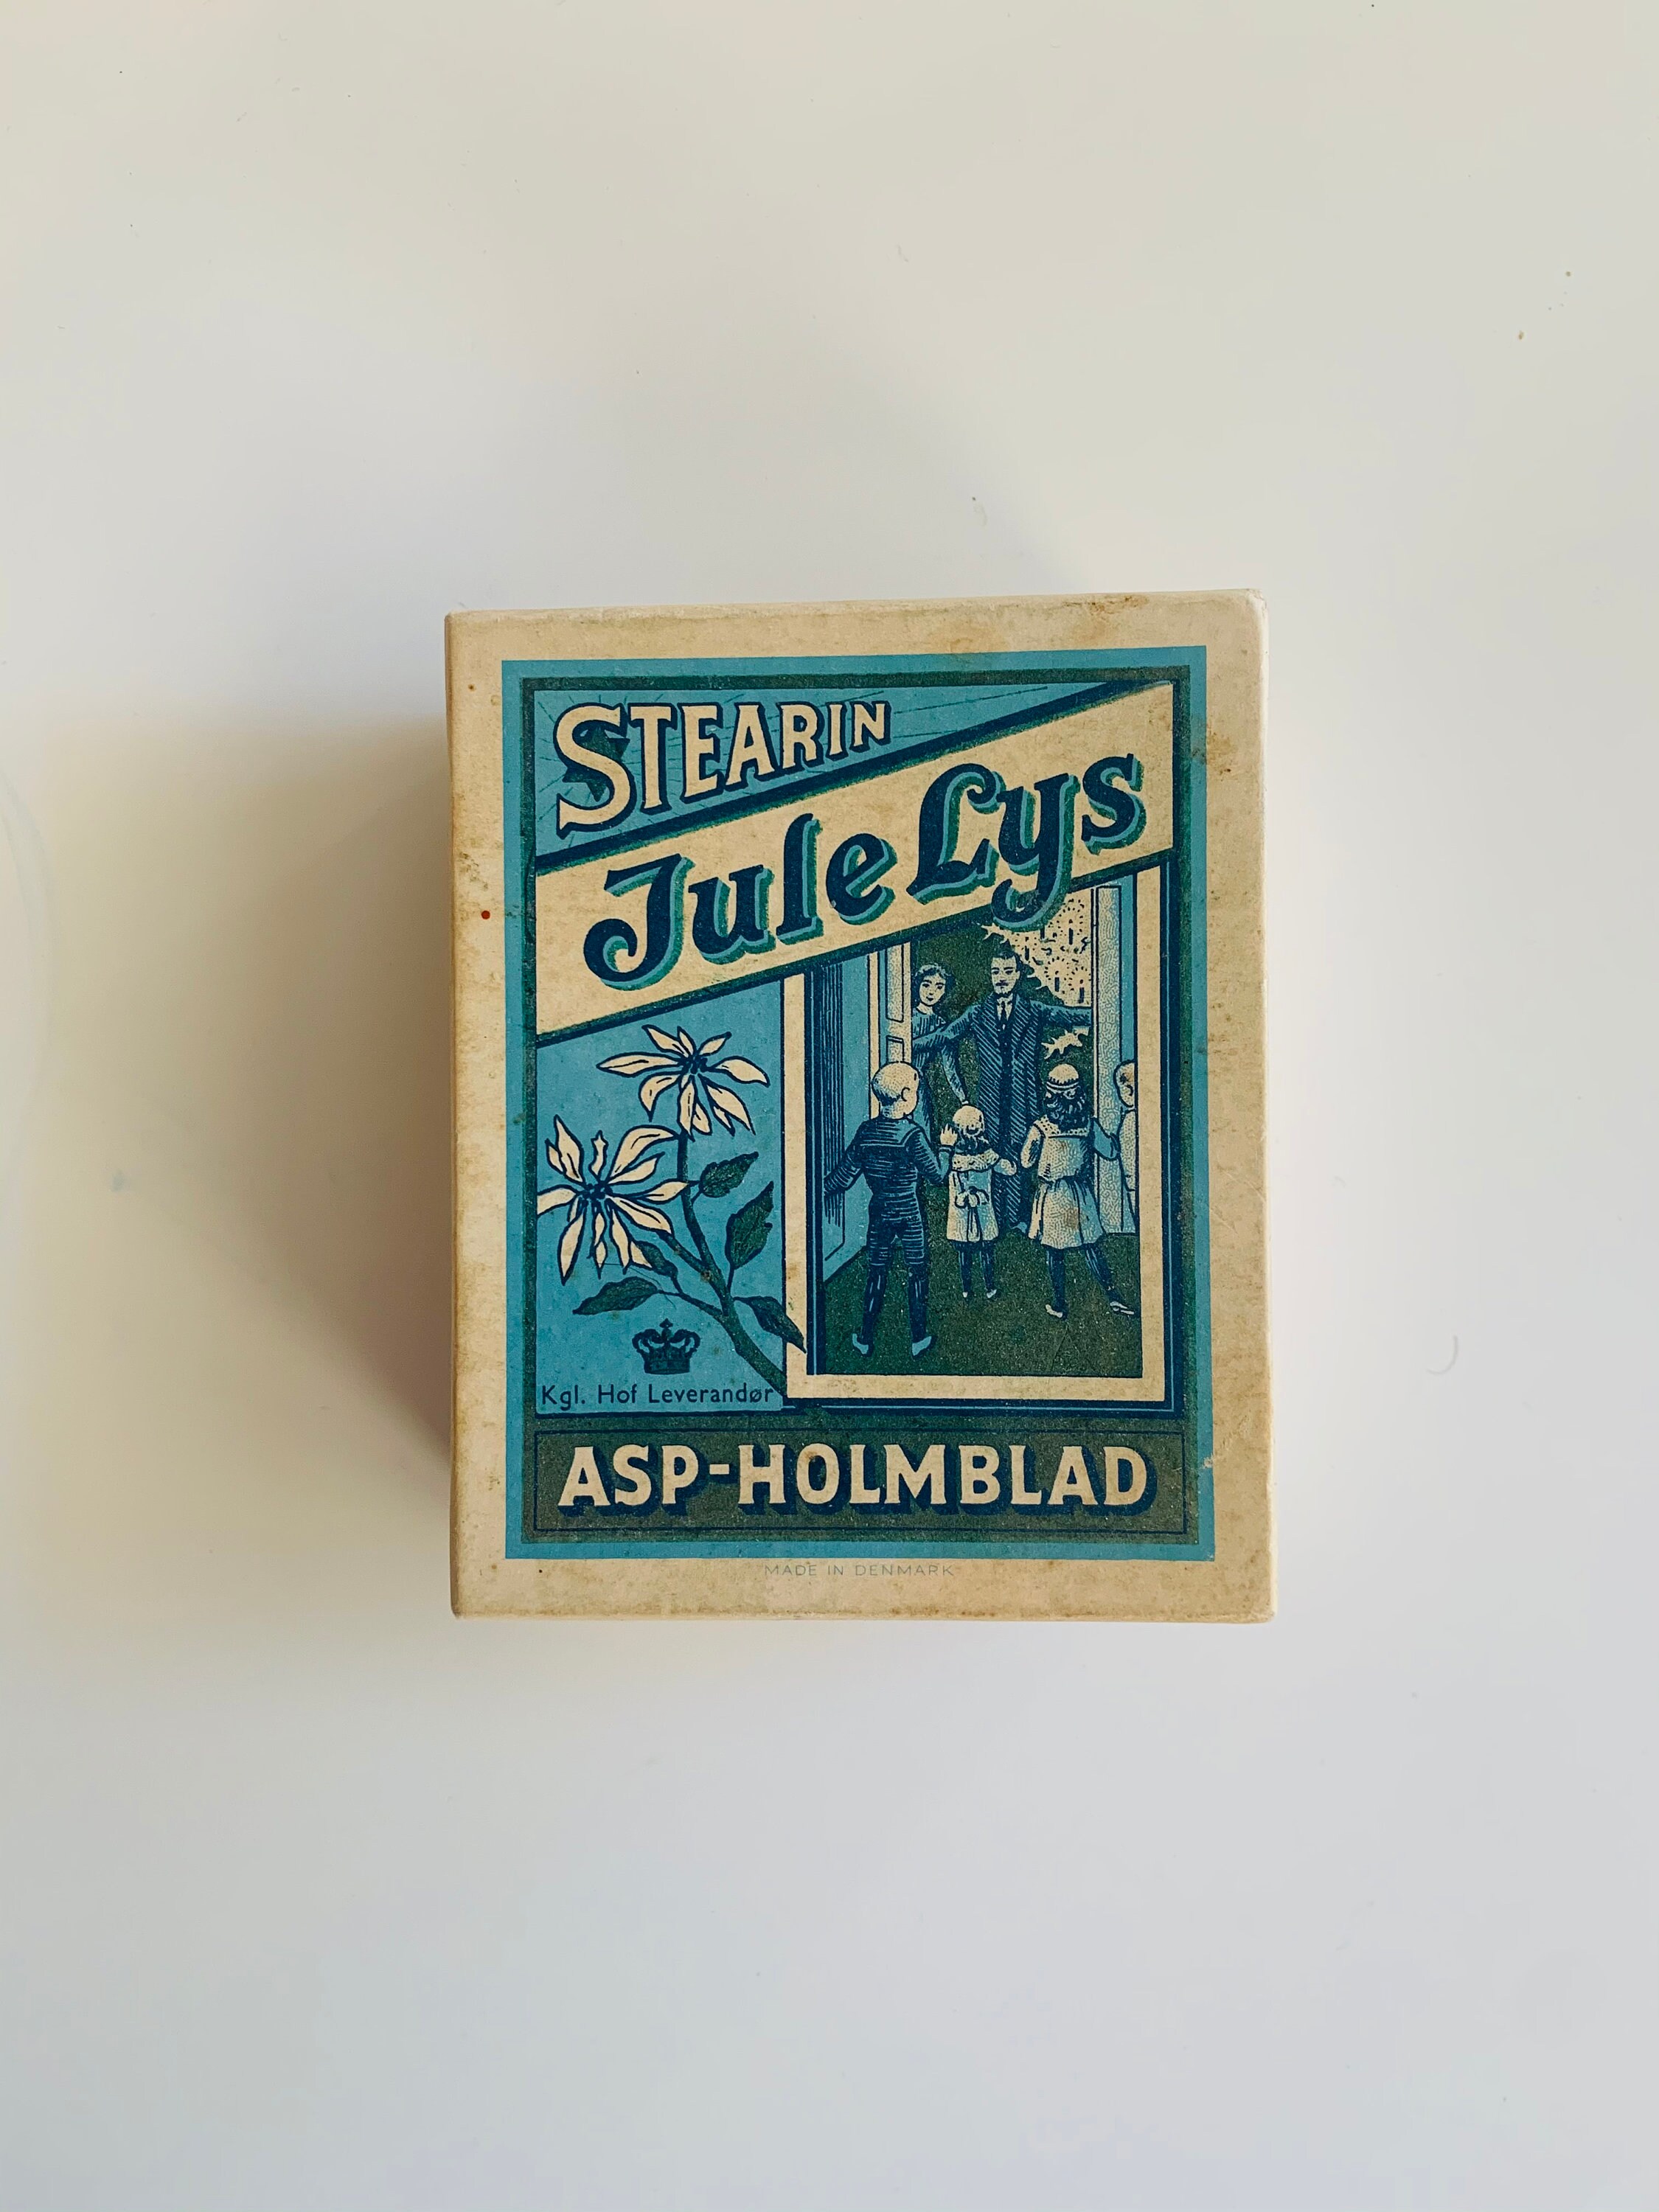 Vintage Package of Candles. Stearin Jute Asp-holmbland - Etsy